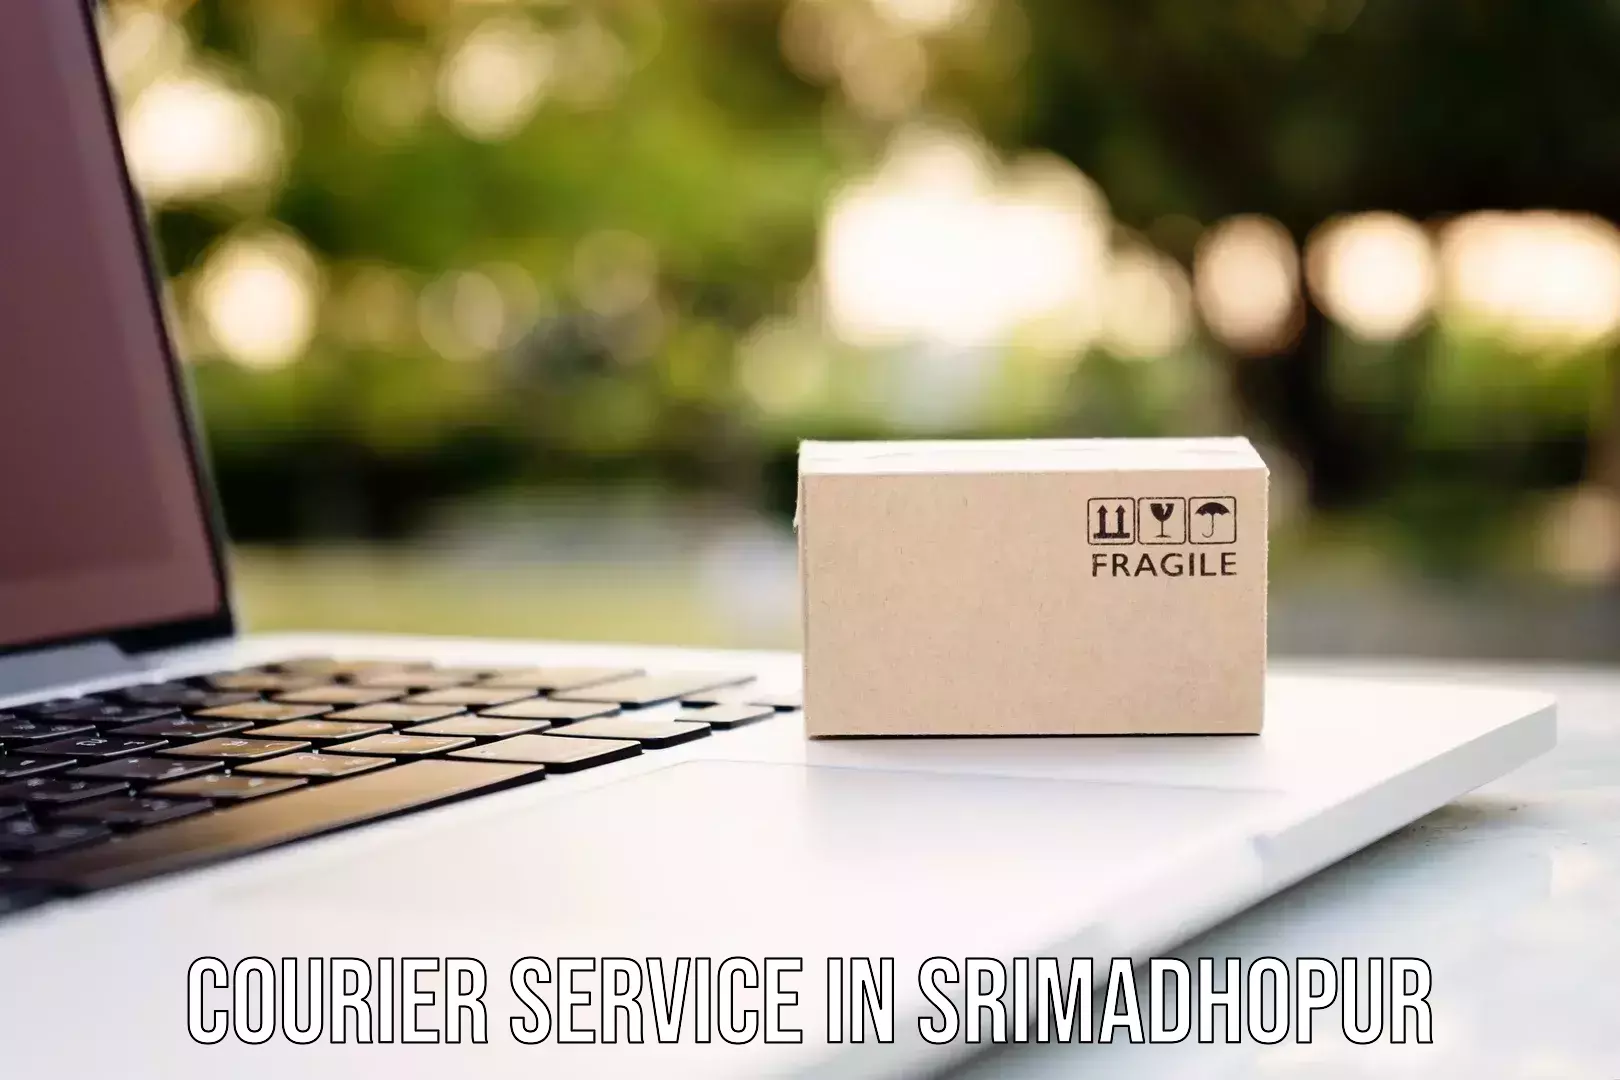 Multi-carrier shipping in Srimadhopur